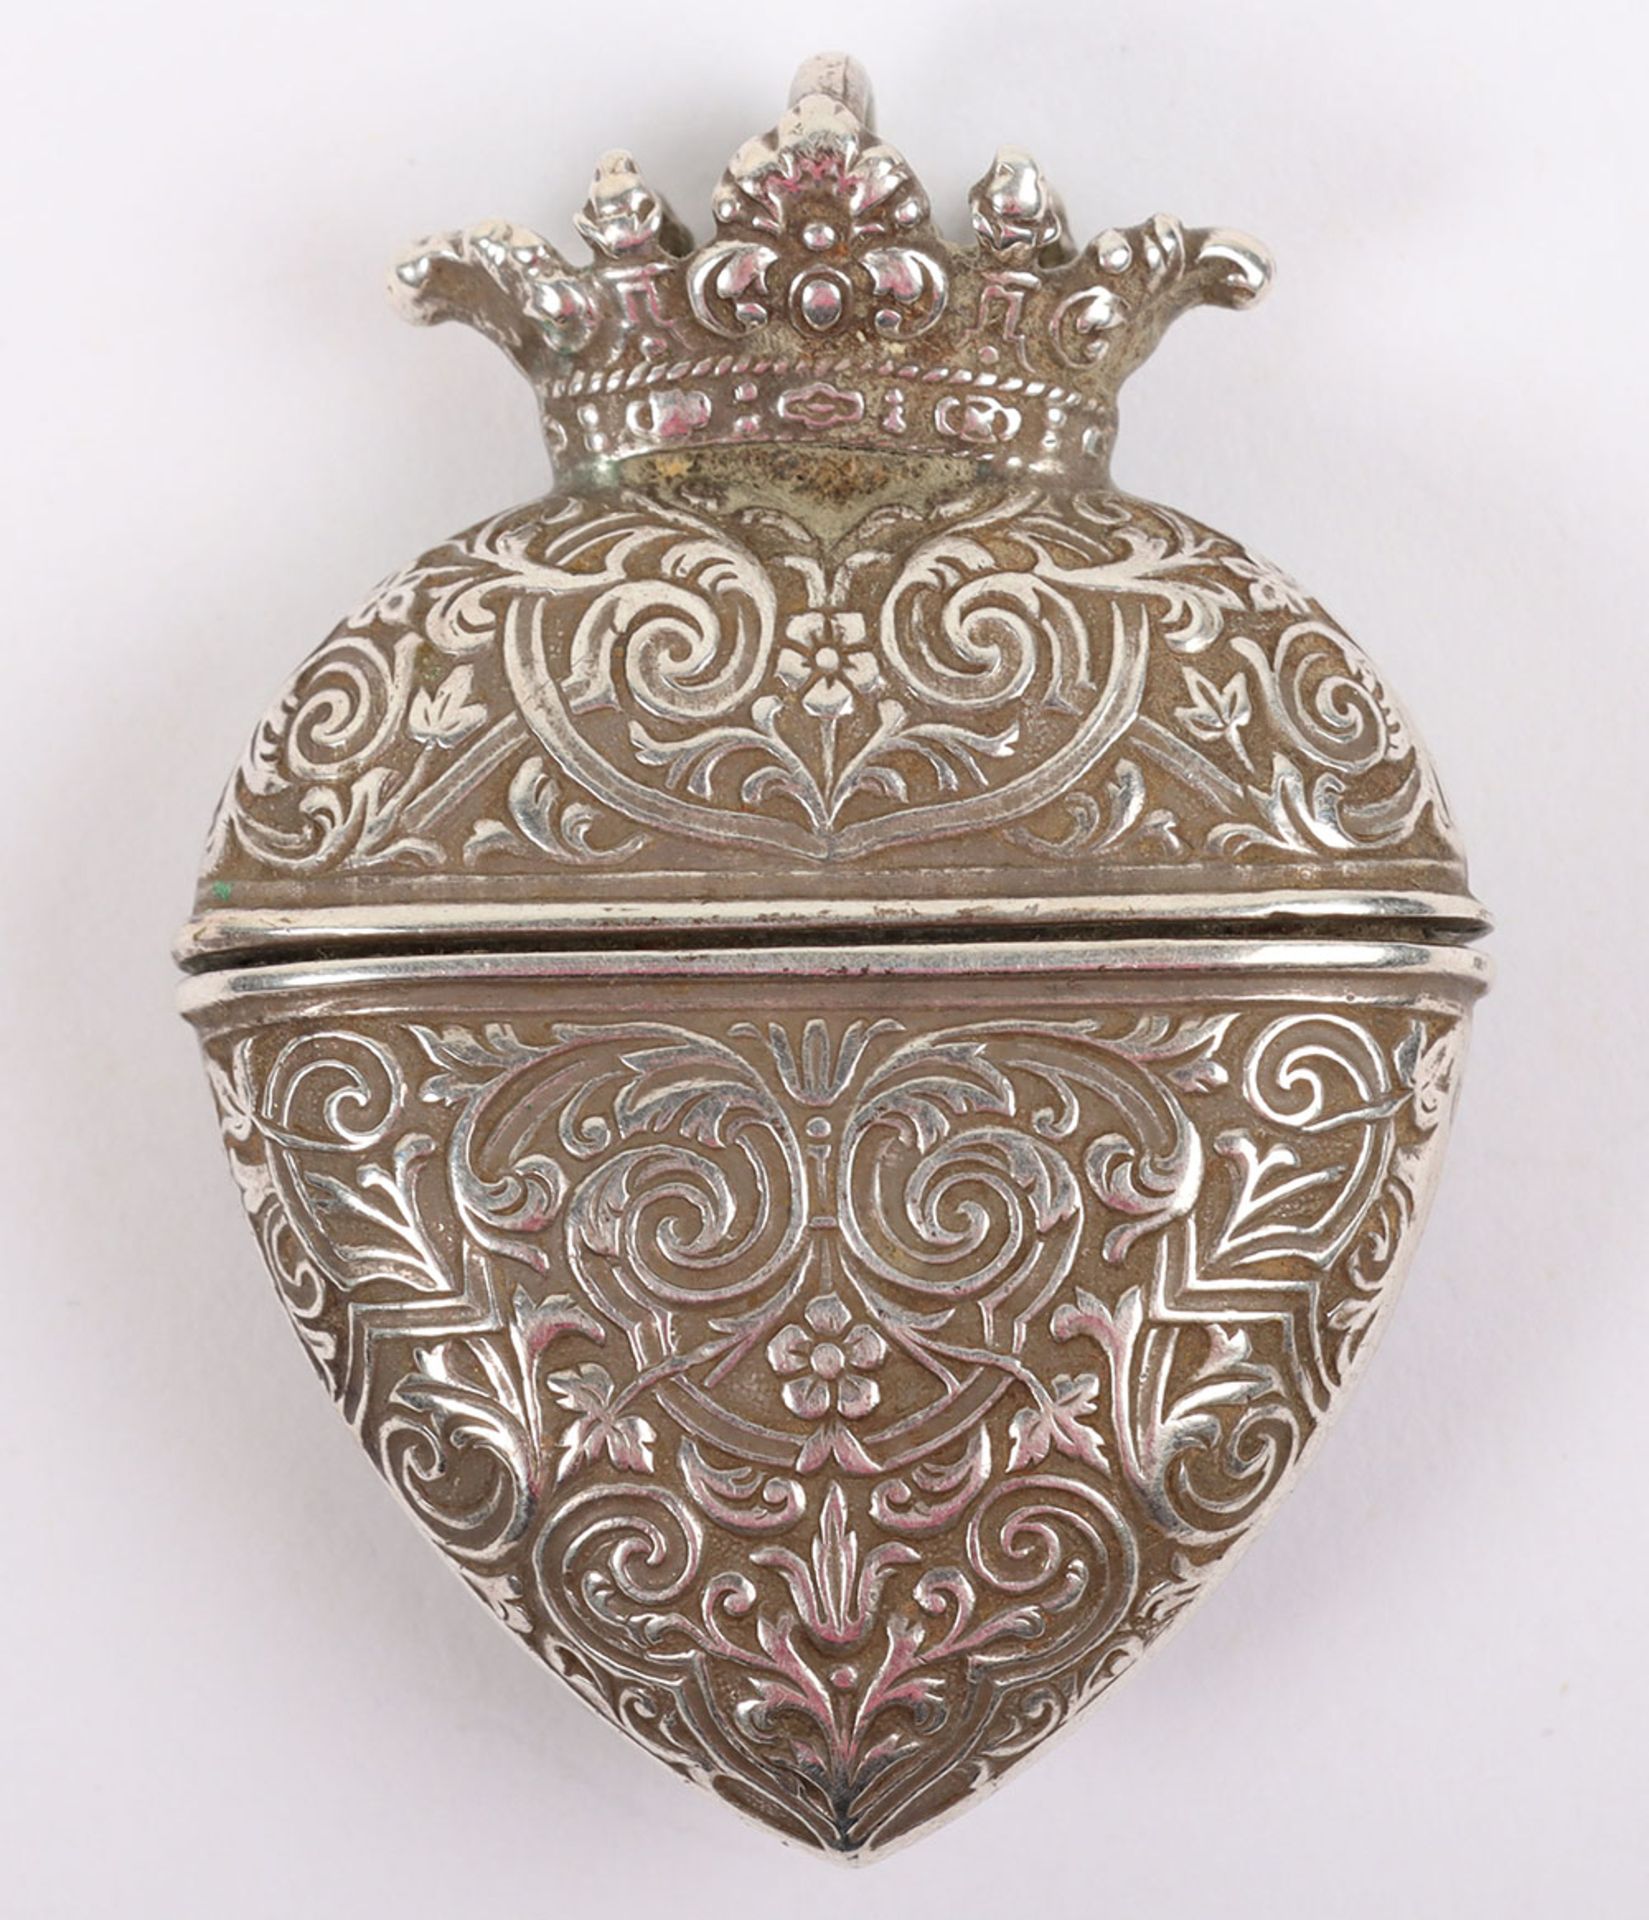 A 19th century French silver pill box